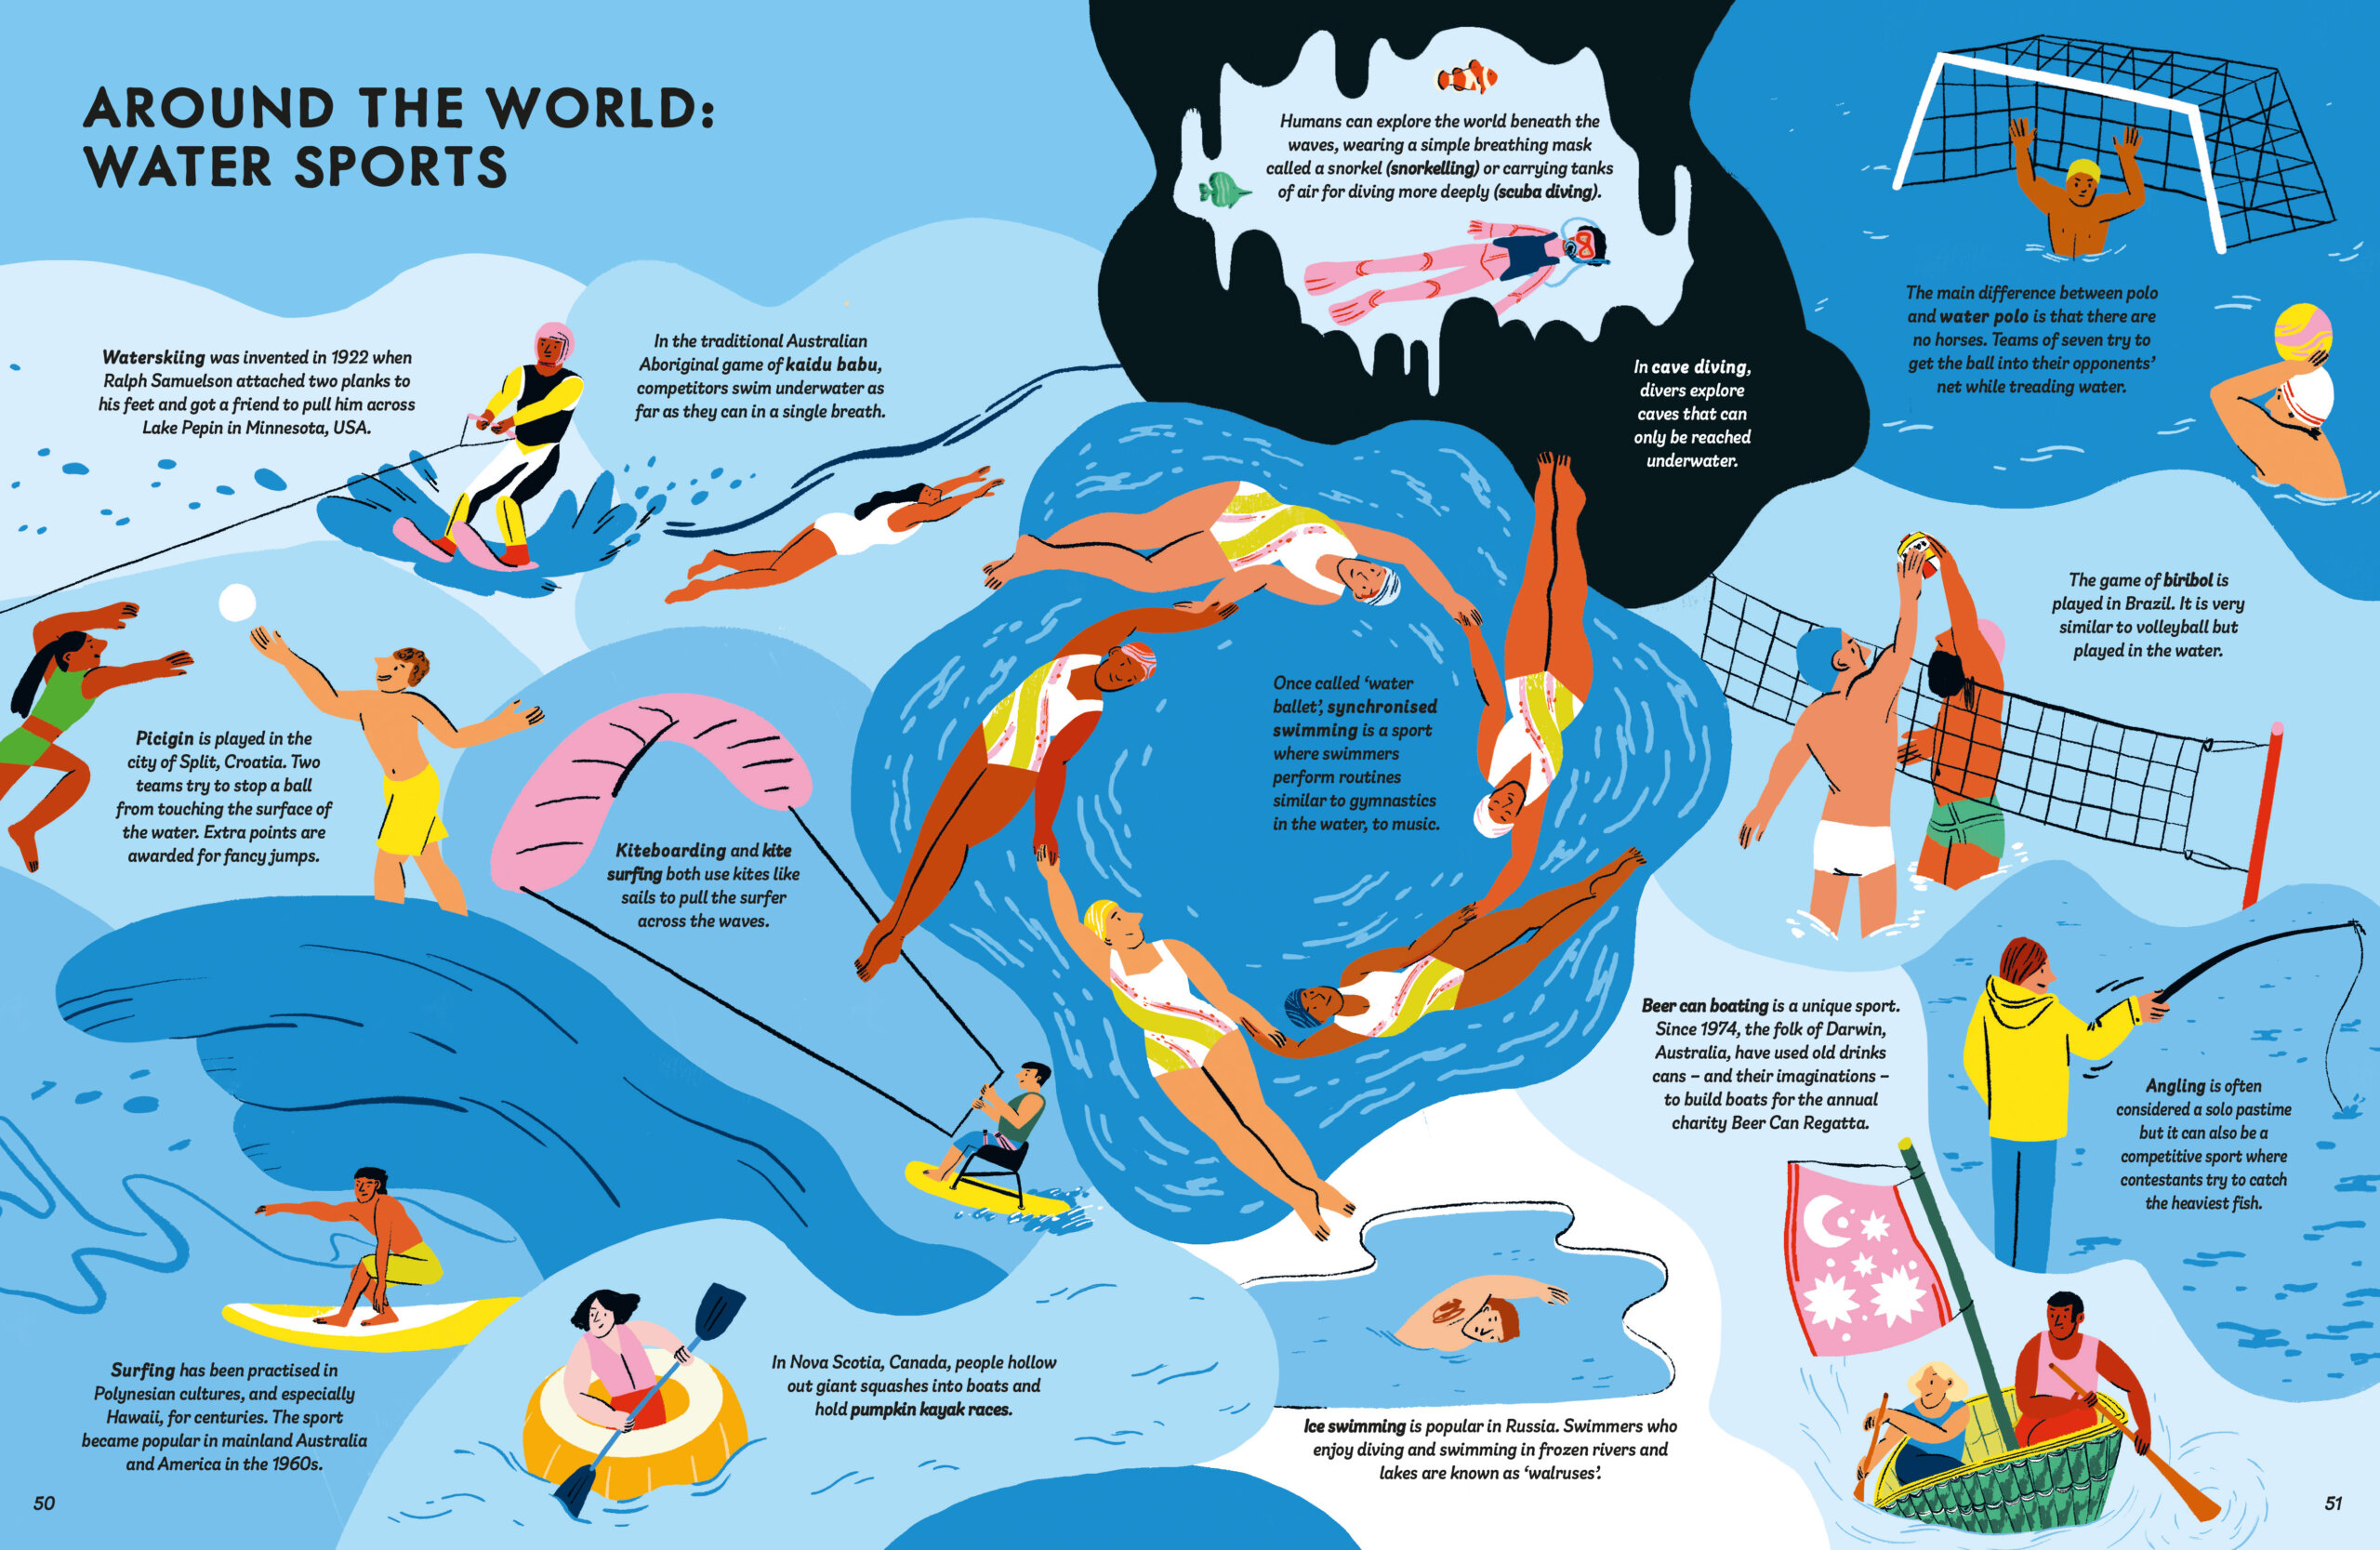 world-of-sport-non-fiction-book-illustration-waterskiing-kaidu-babu-picigin-kiteboarding-synchronised-swimming-surfing-cave-diving-snorkelling-water-polo-biribol-angling-violeta-noy